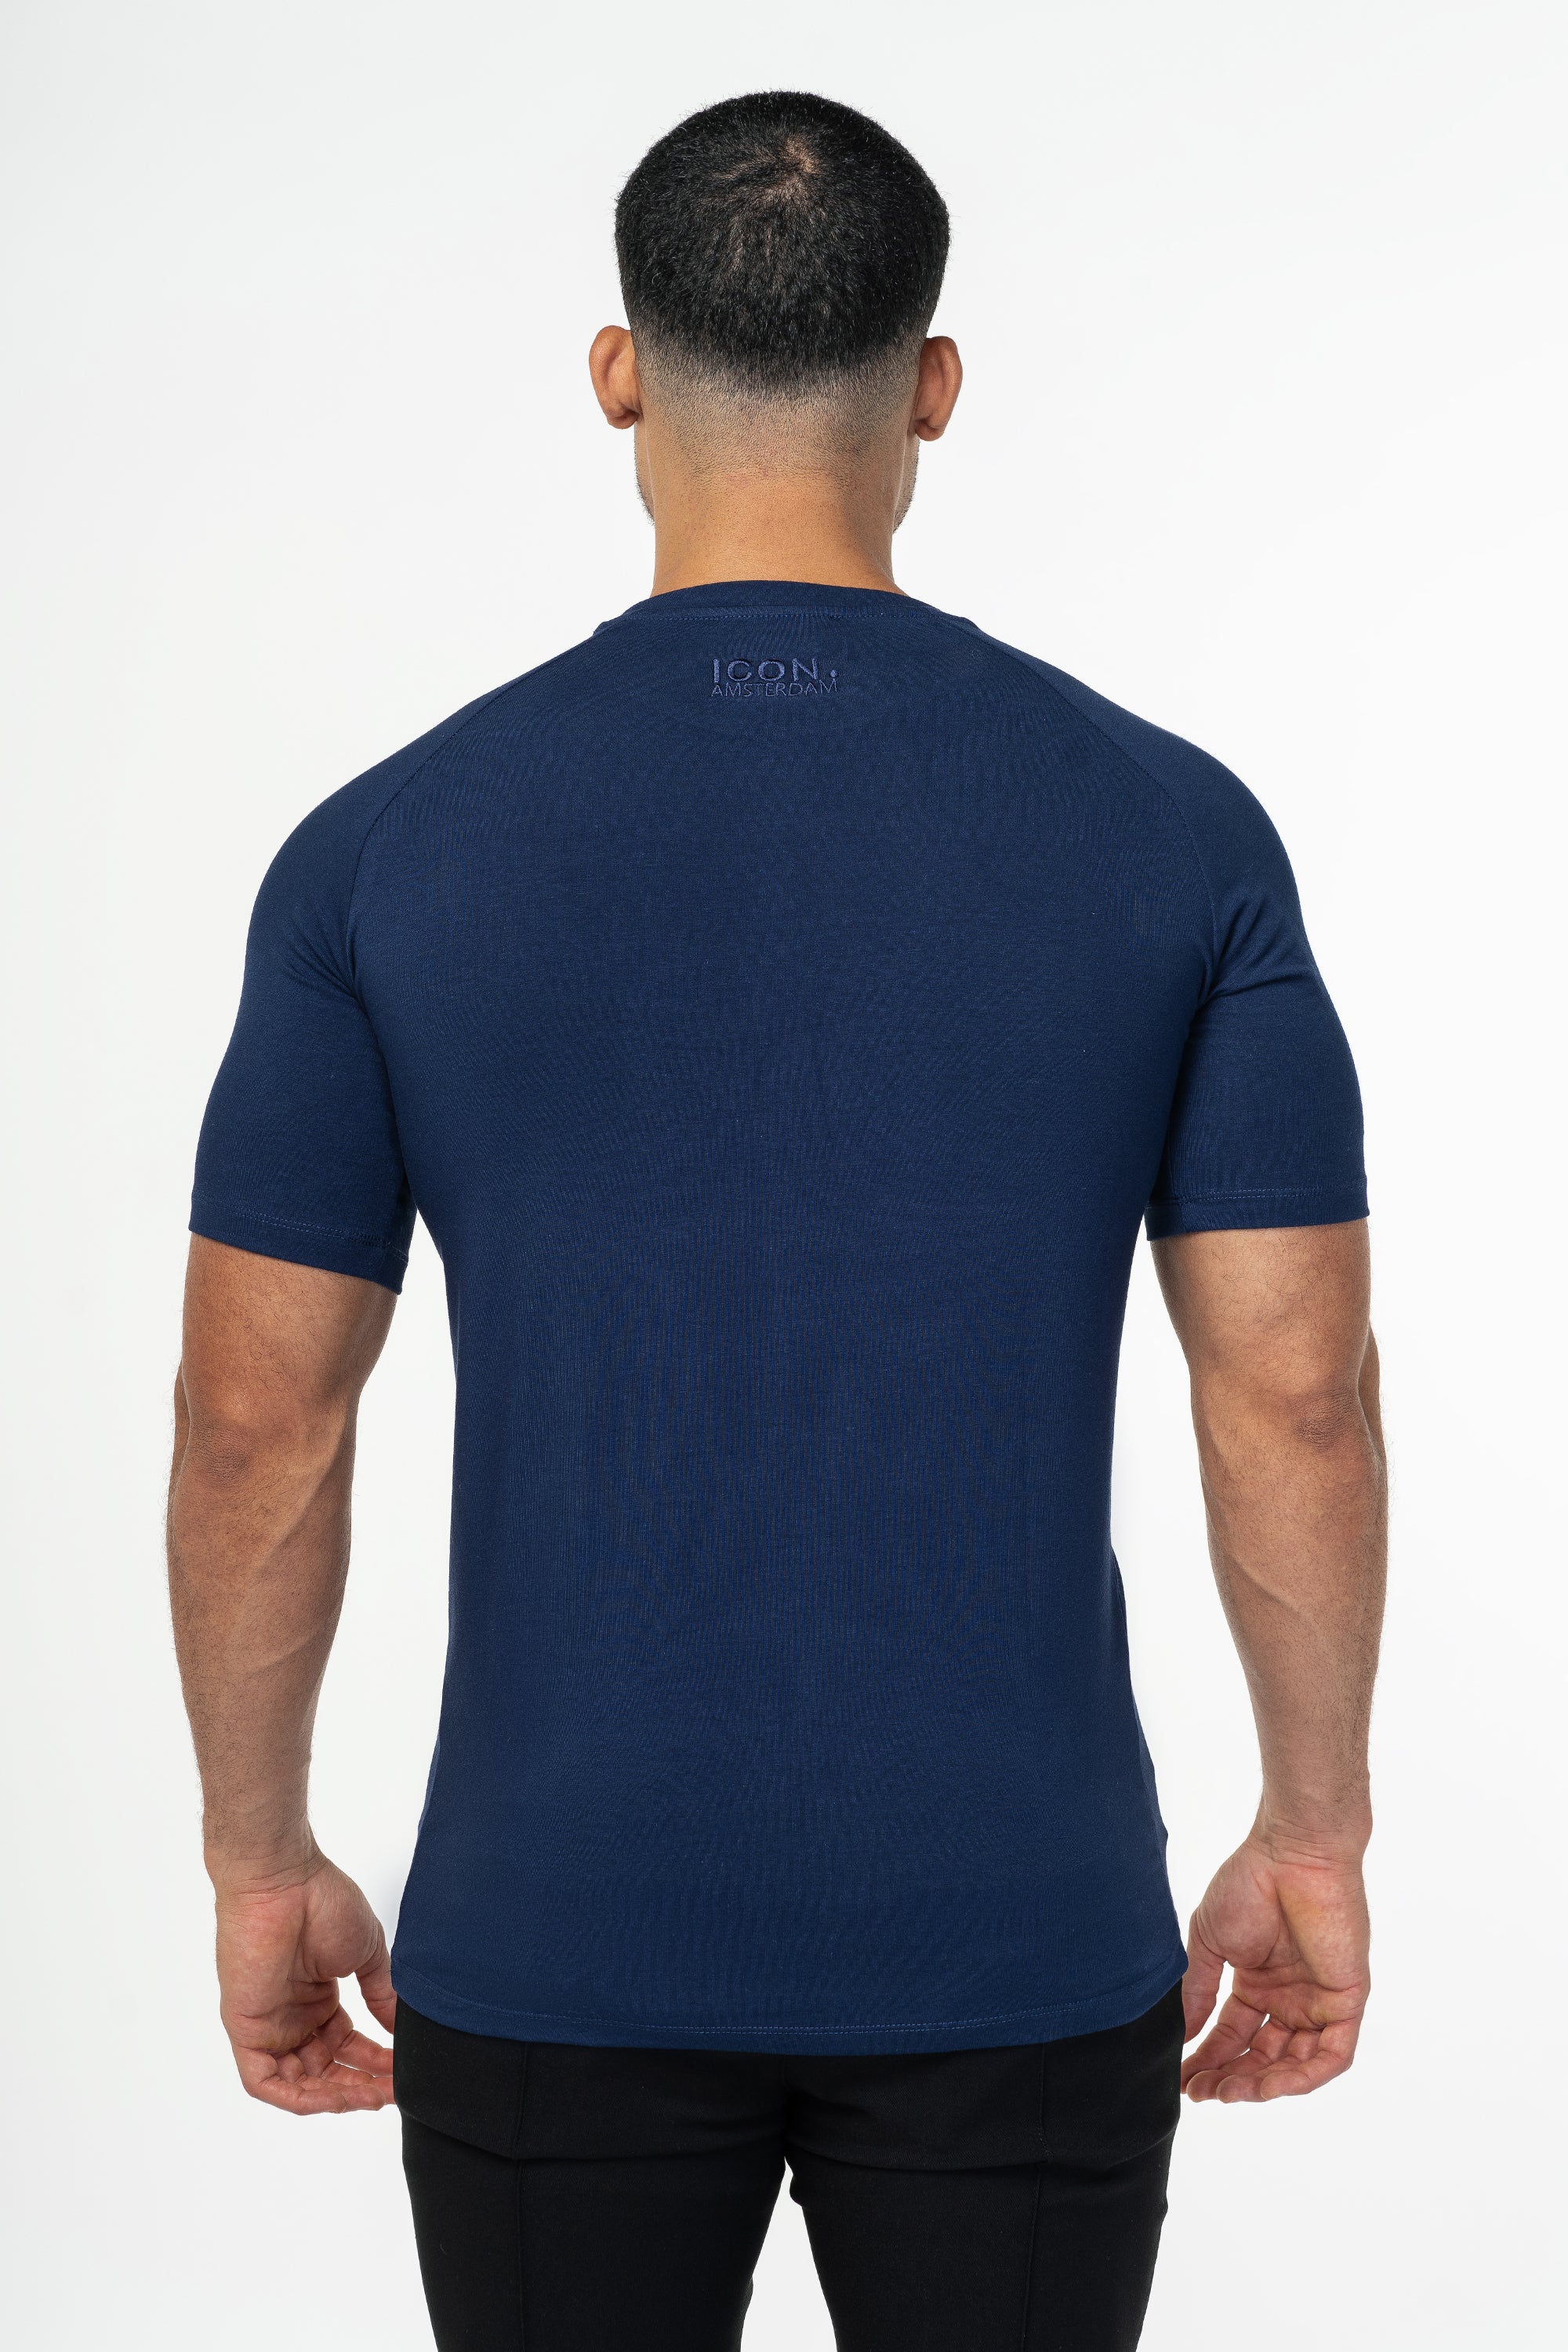 THE MUSCLE BASIC T-SHIRT - BLU SCURO